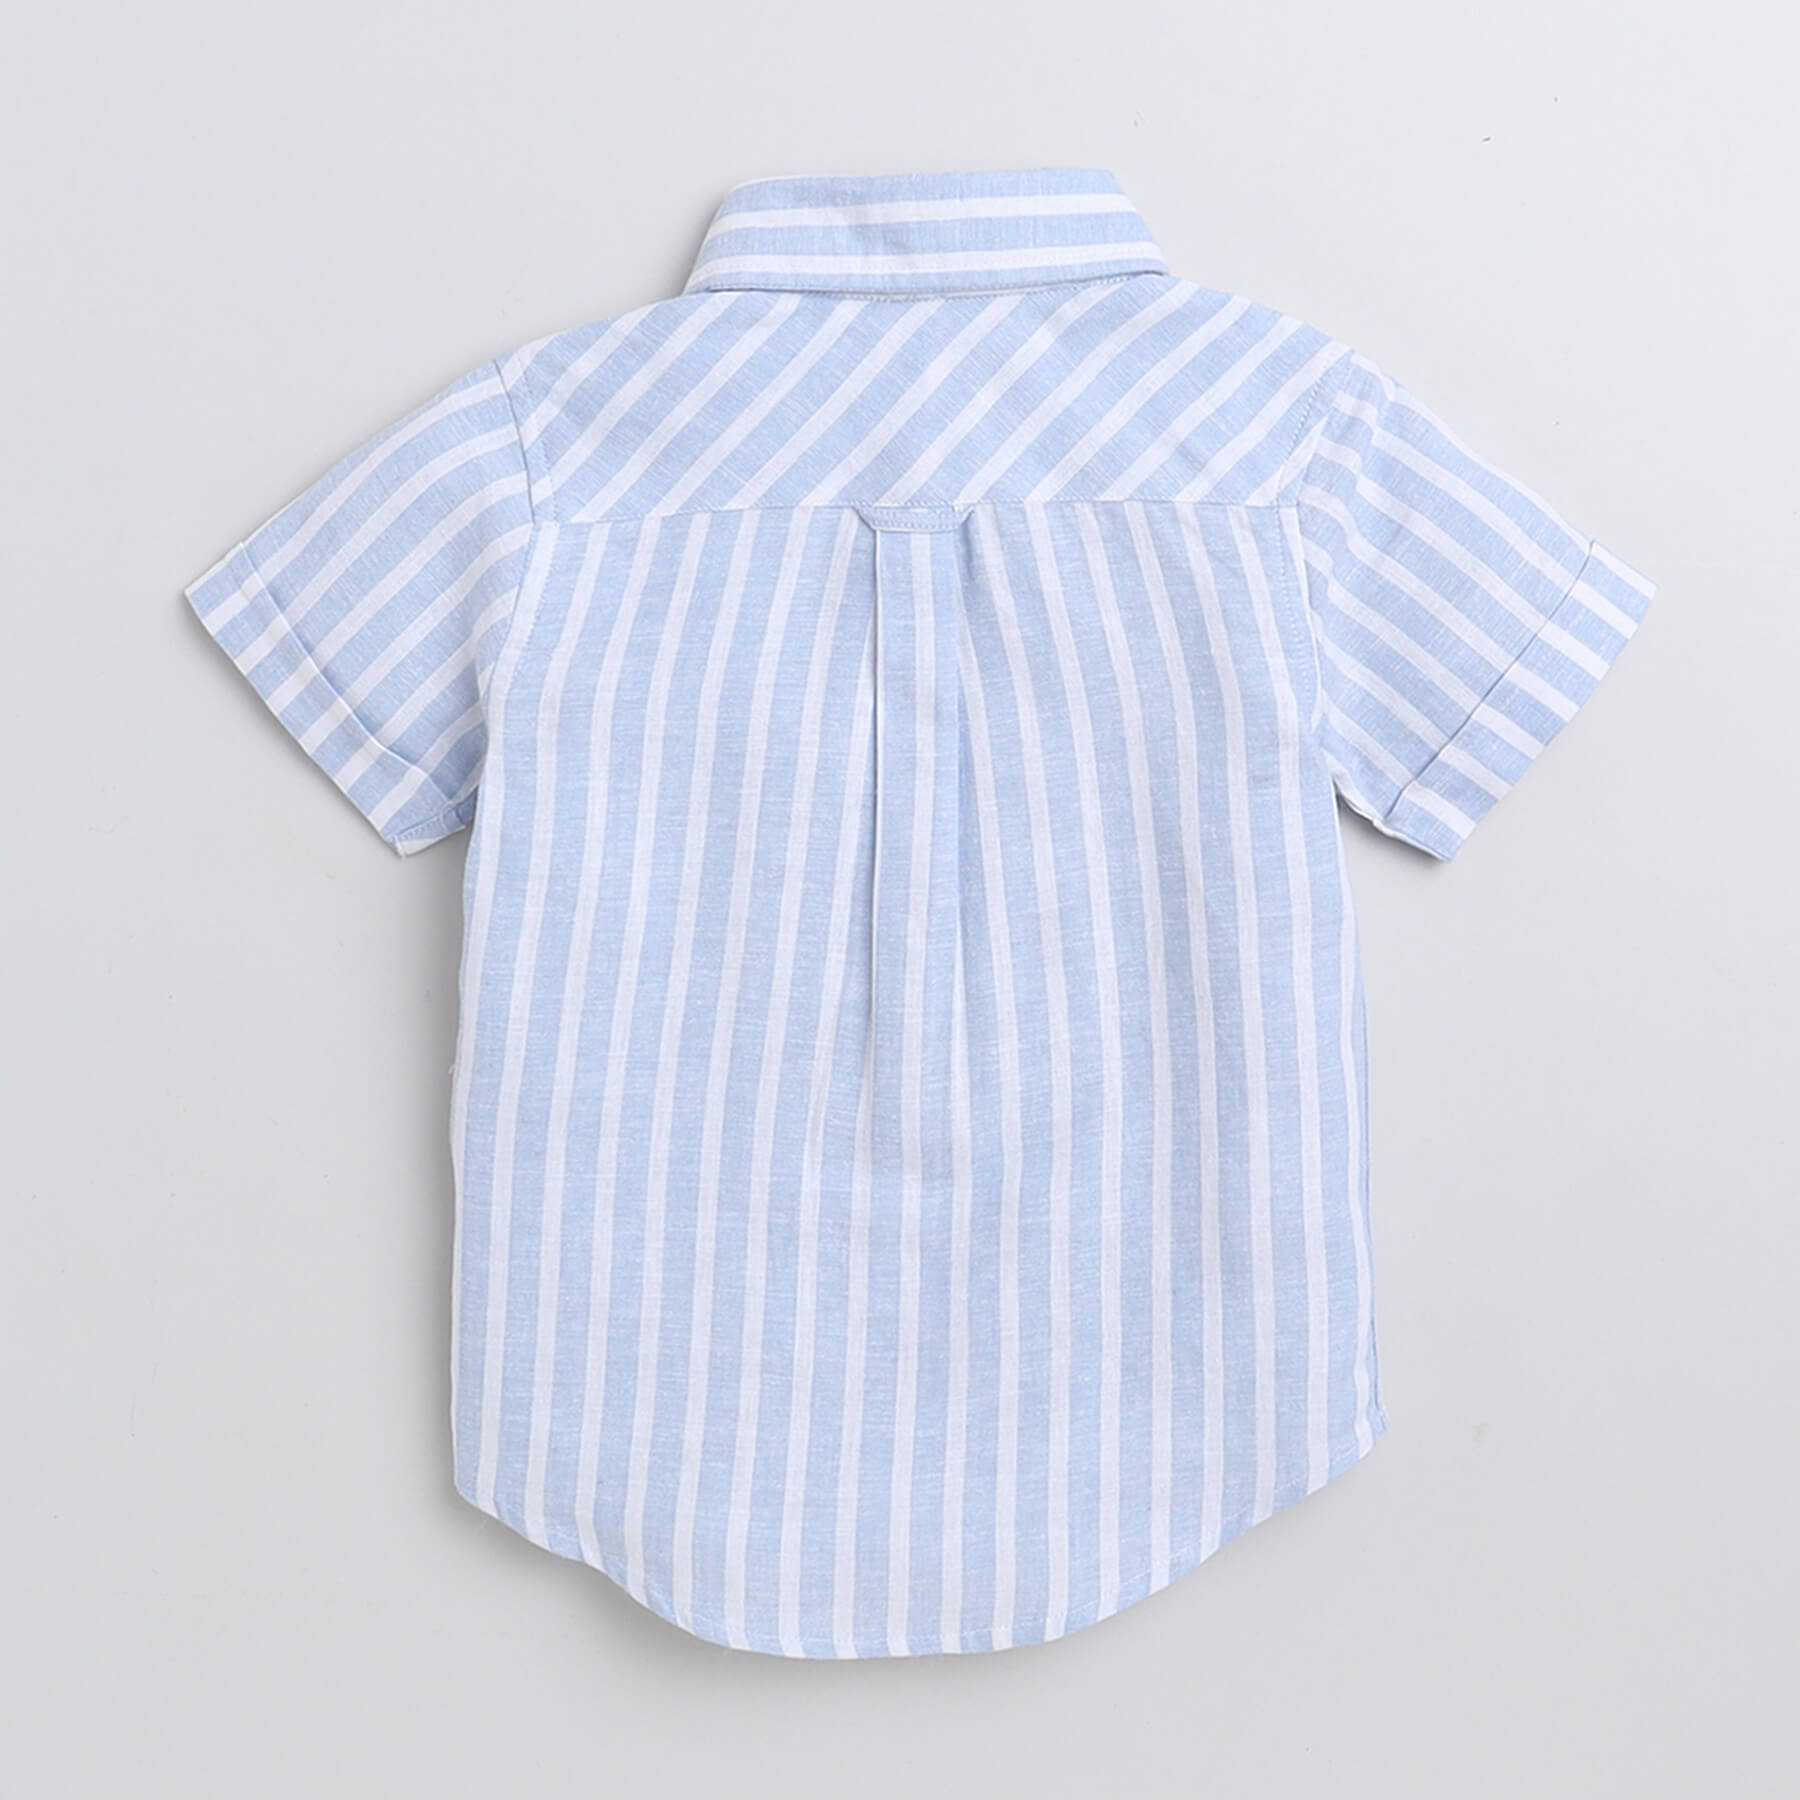 Taffykids stripes embroidered half sleeves shirt - White/Blue